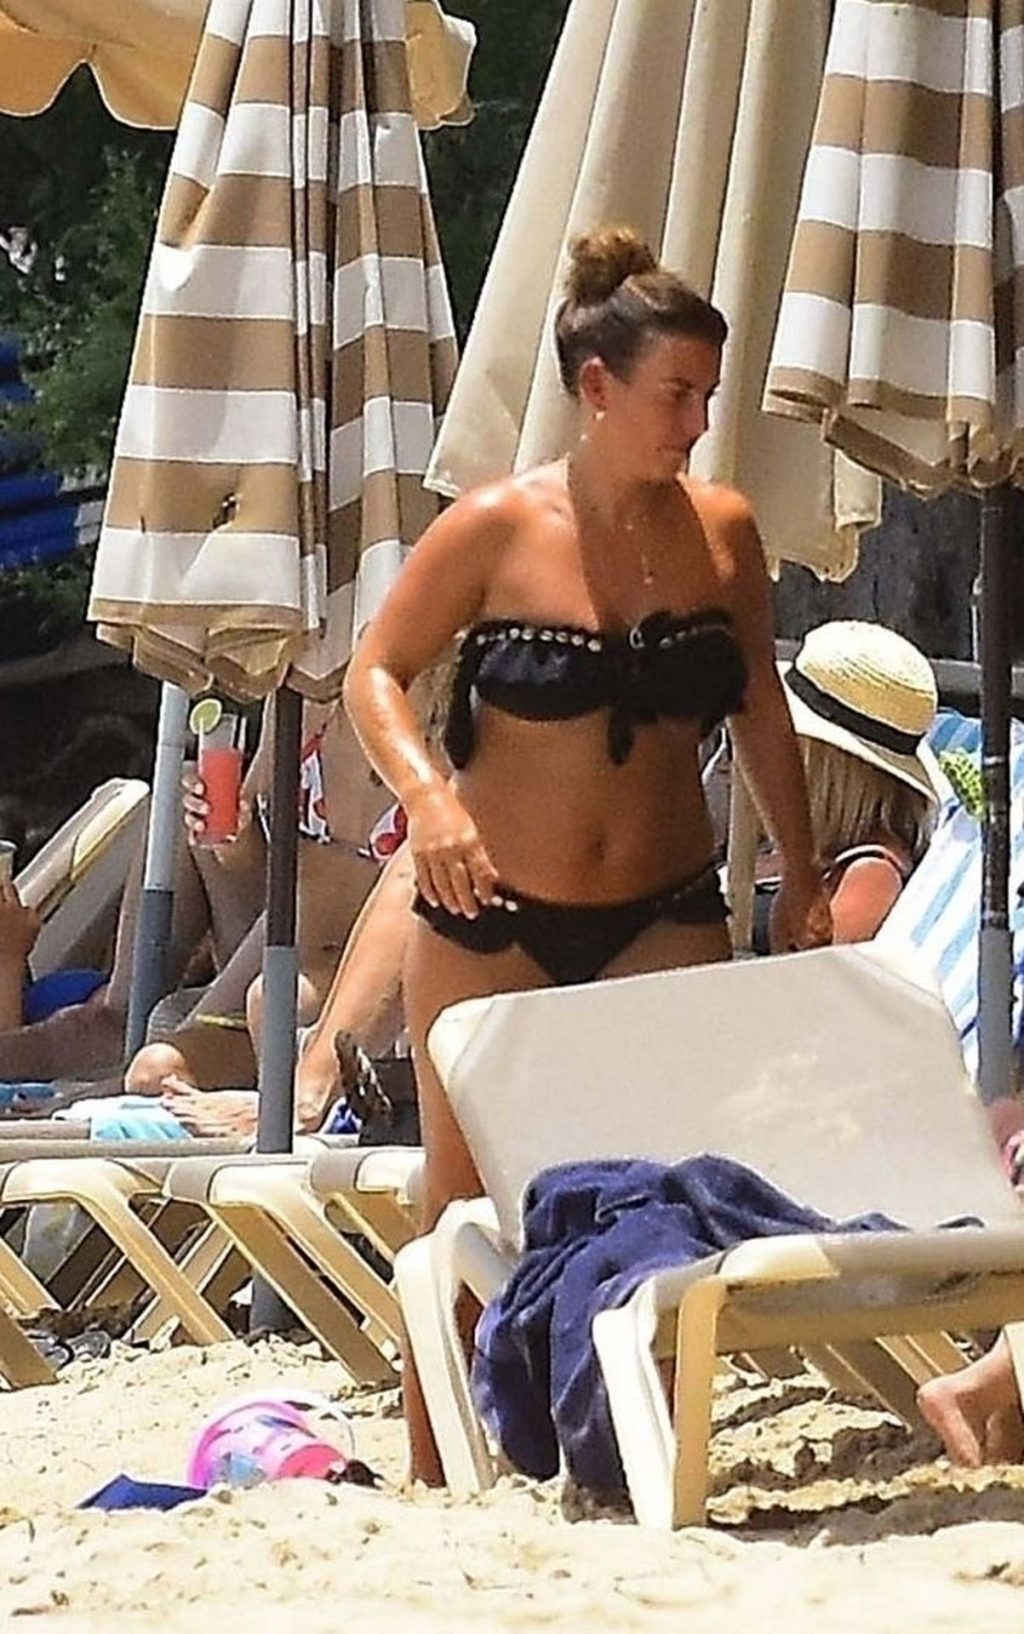 Coleen Rooney Dons Her Skimpy Black Bikini on Holiday in Barbados (166 Photos)